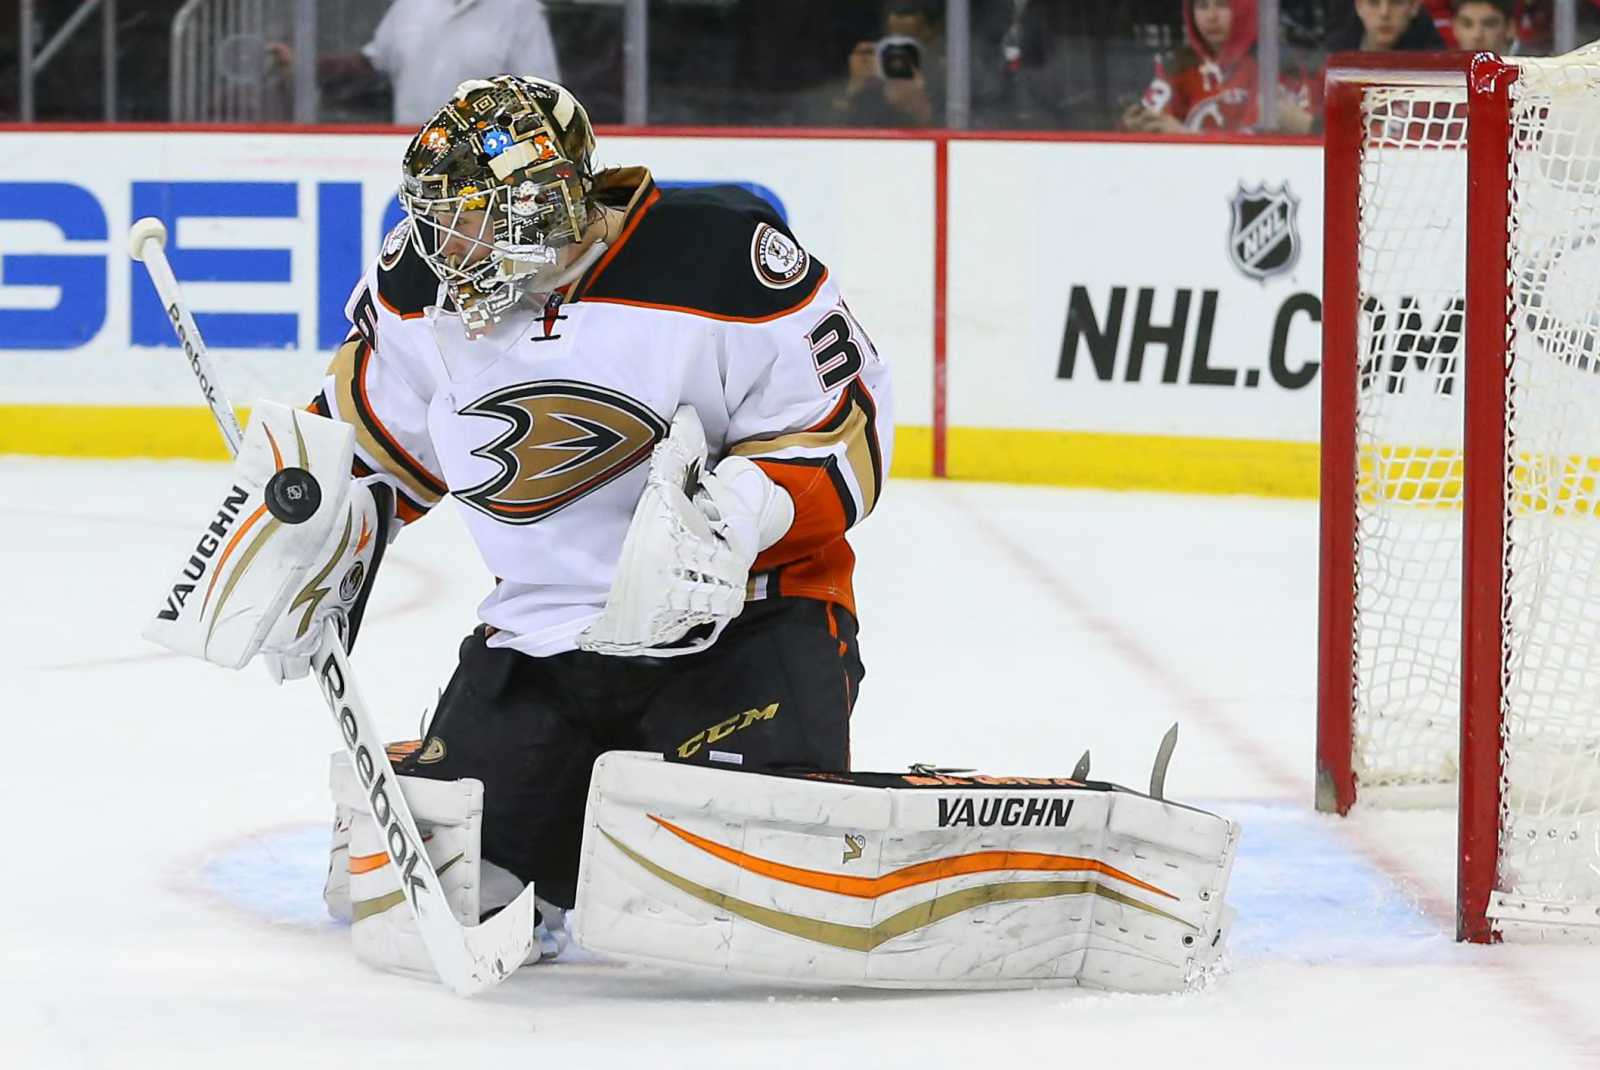 New-look Ducks, led by John Gibson in goal, beat Devils 3-2 – New York  Daily News